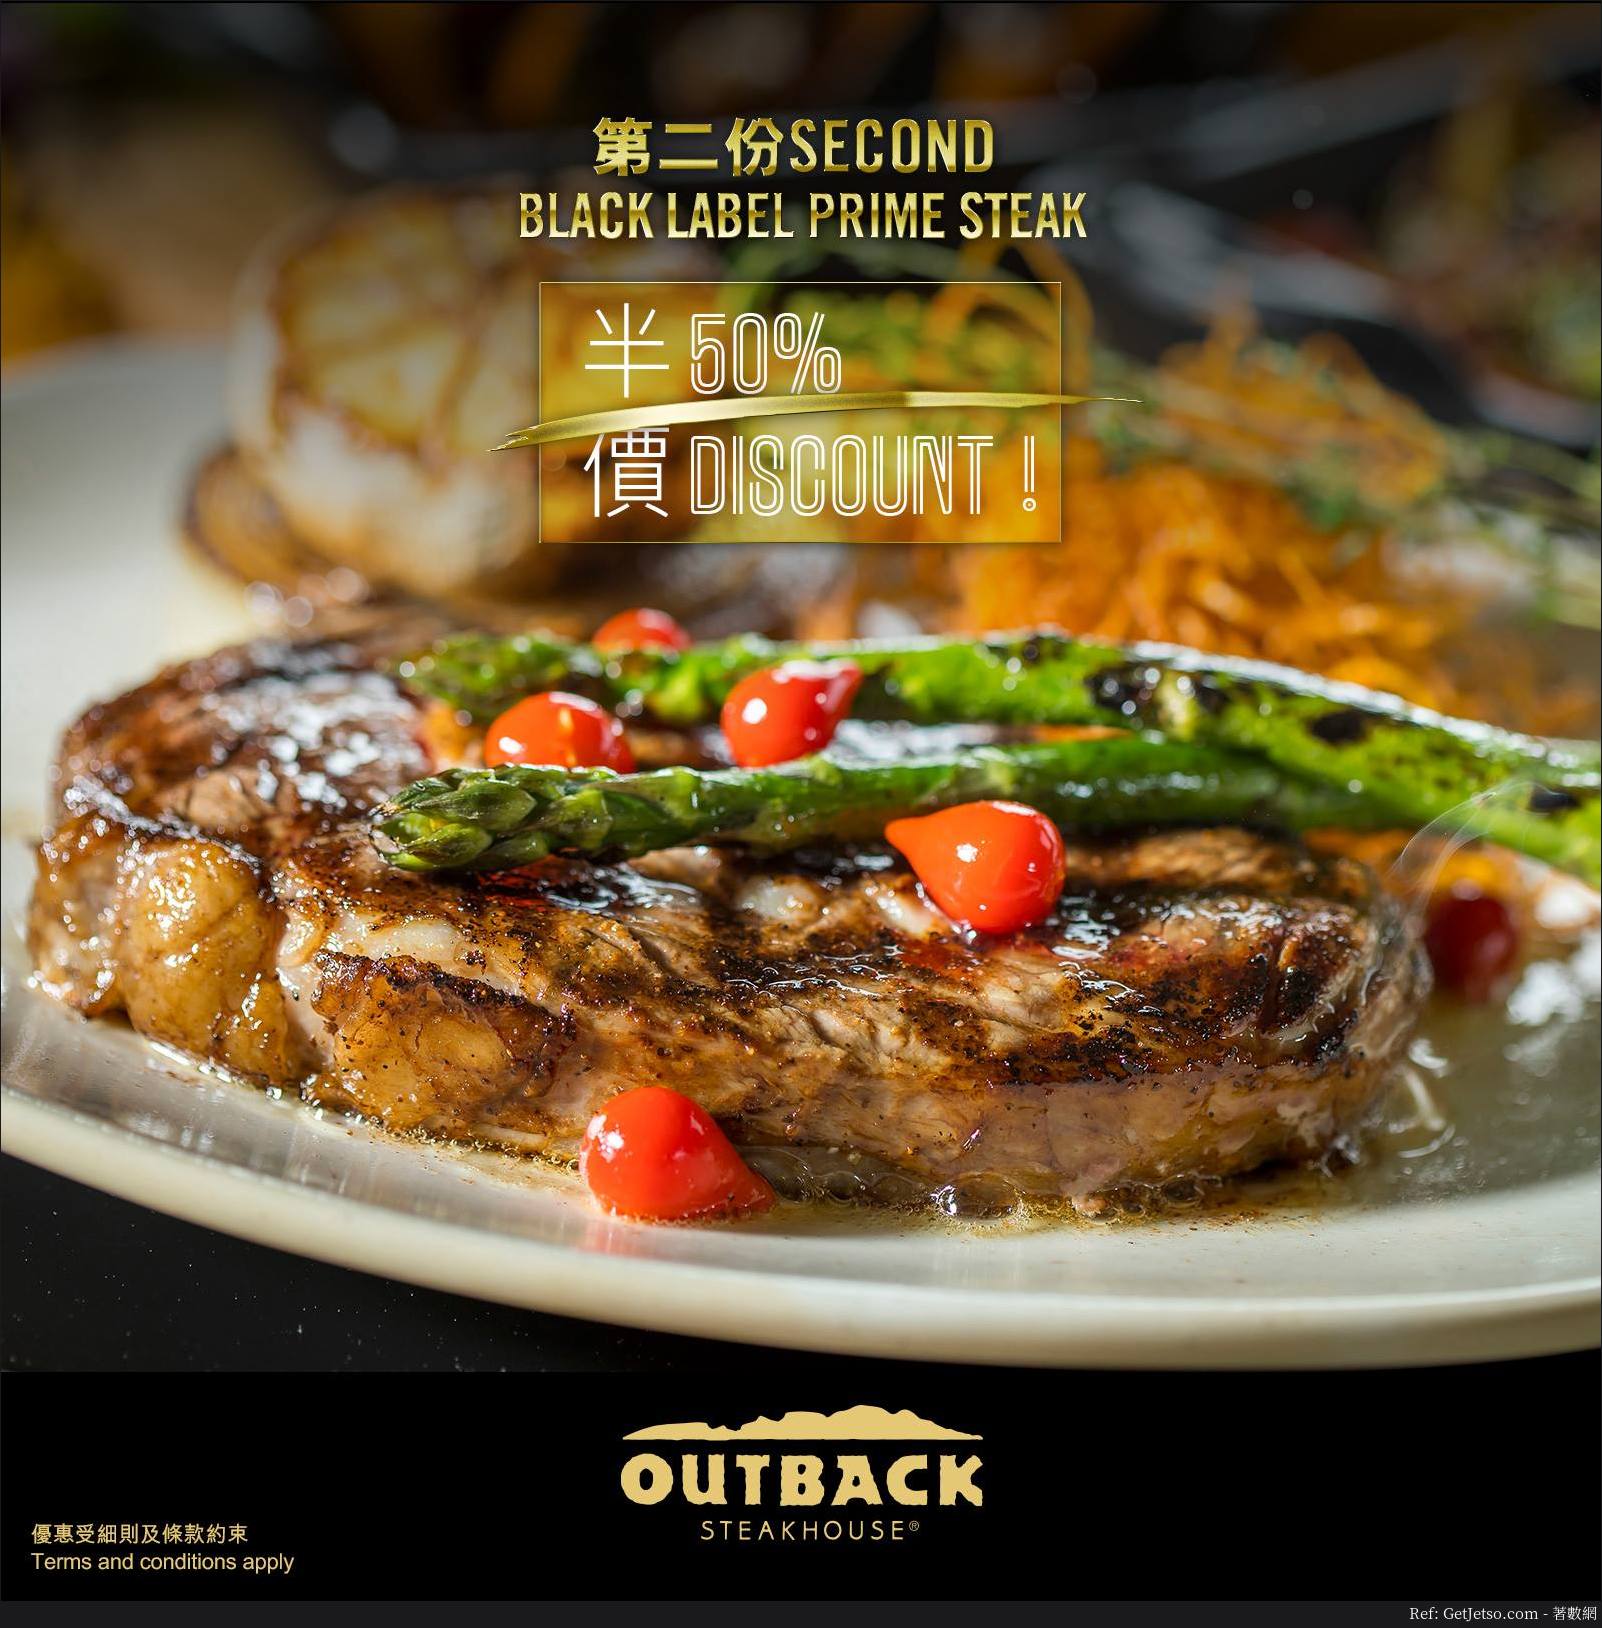 Outback Steakhouse 第2份牛扒半價優惠(17年11月18-19日)圖片1